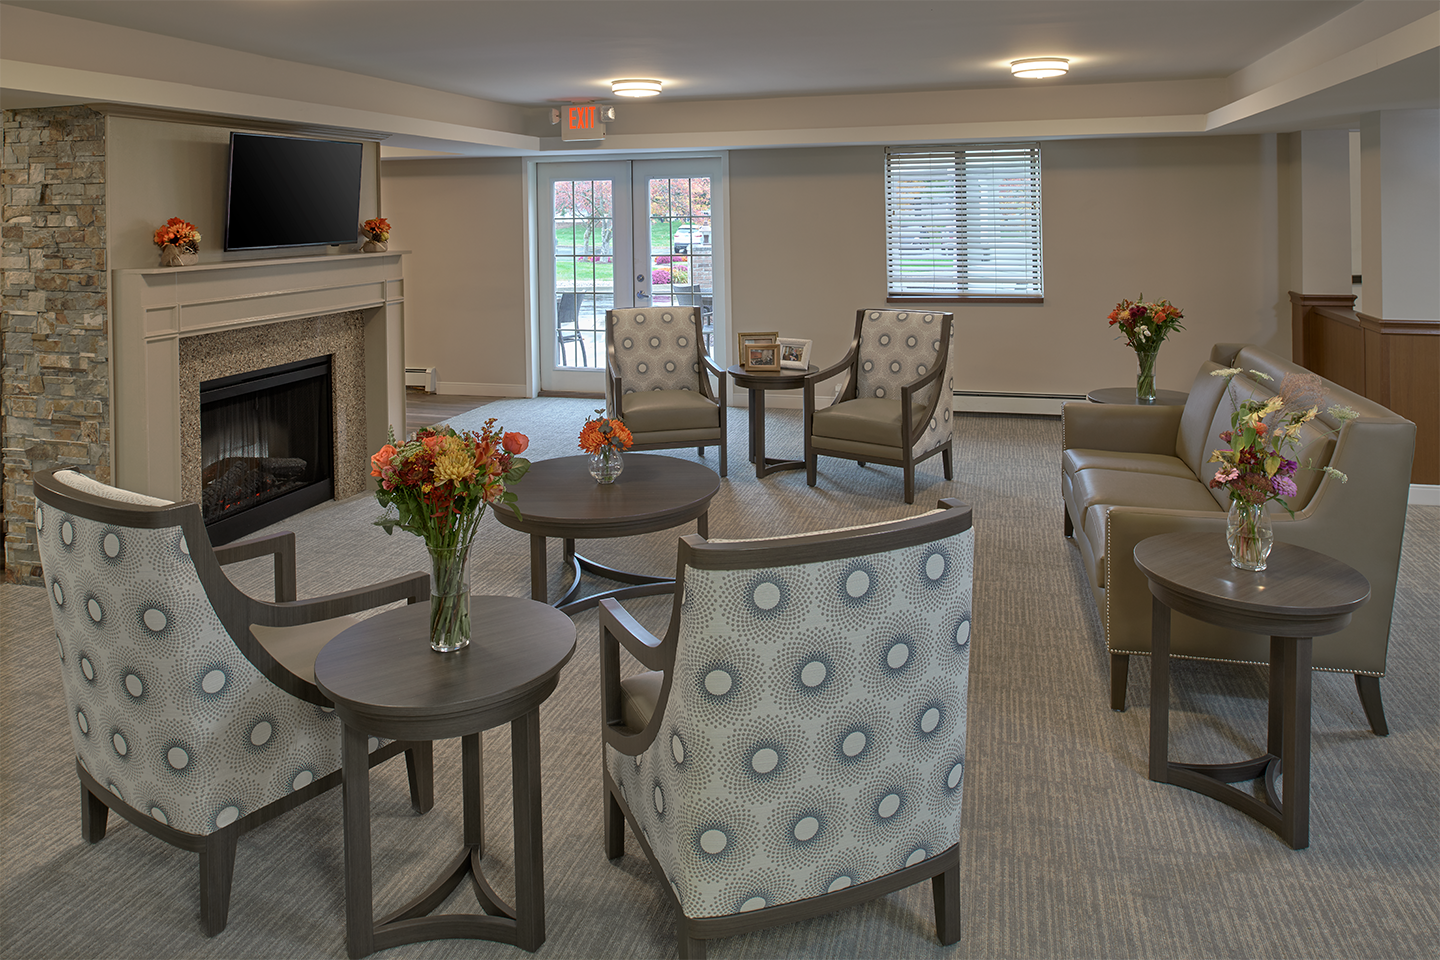 Common area of American House Grand Blanc, an assisted living community in Genesee County, Michigan.